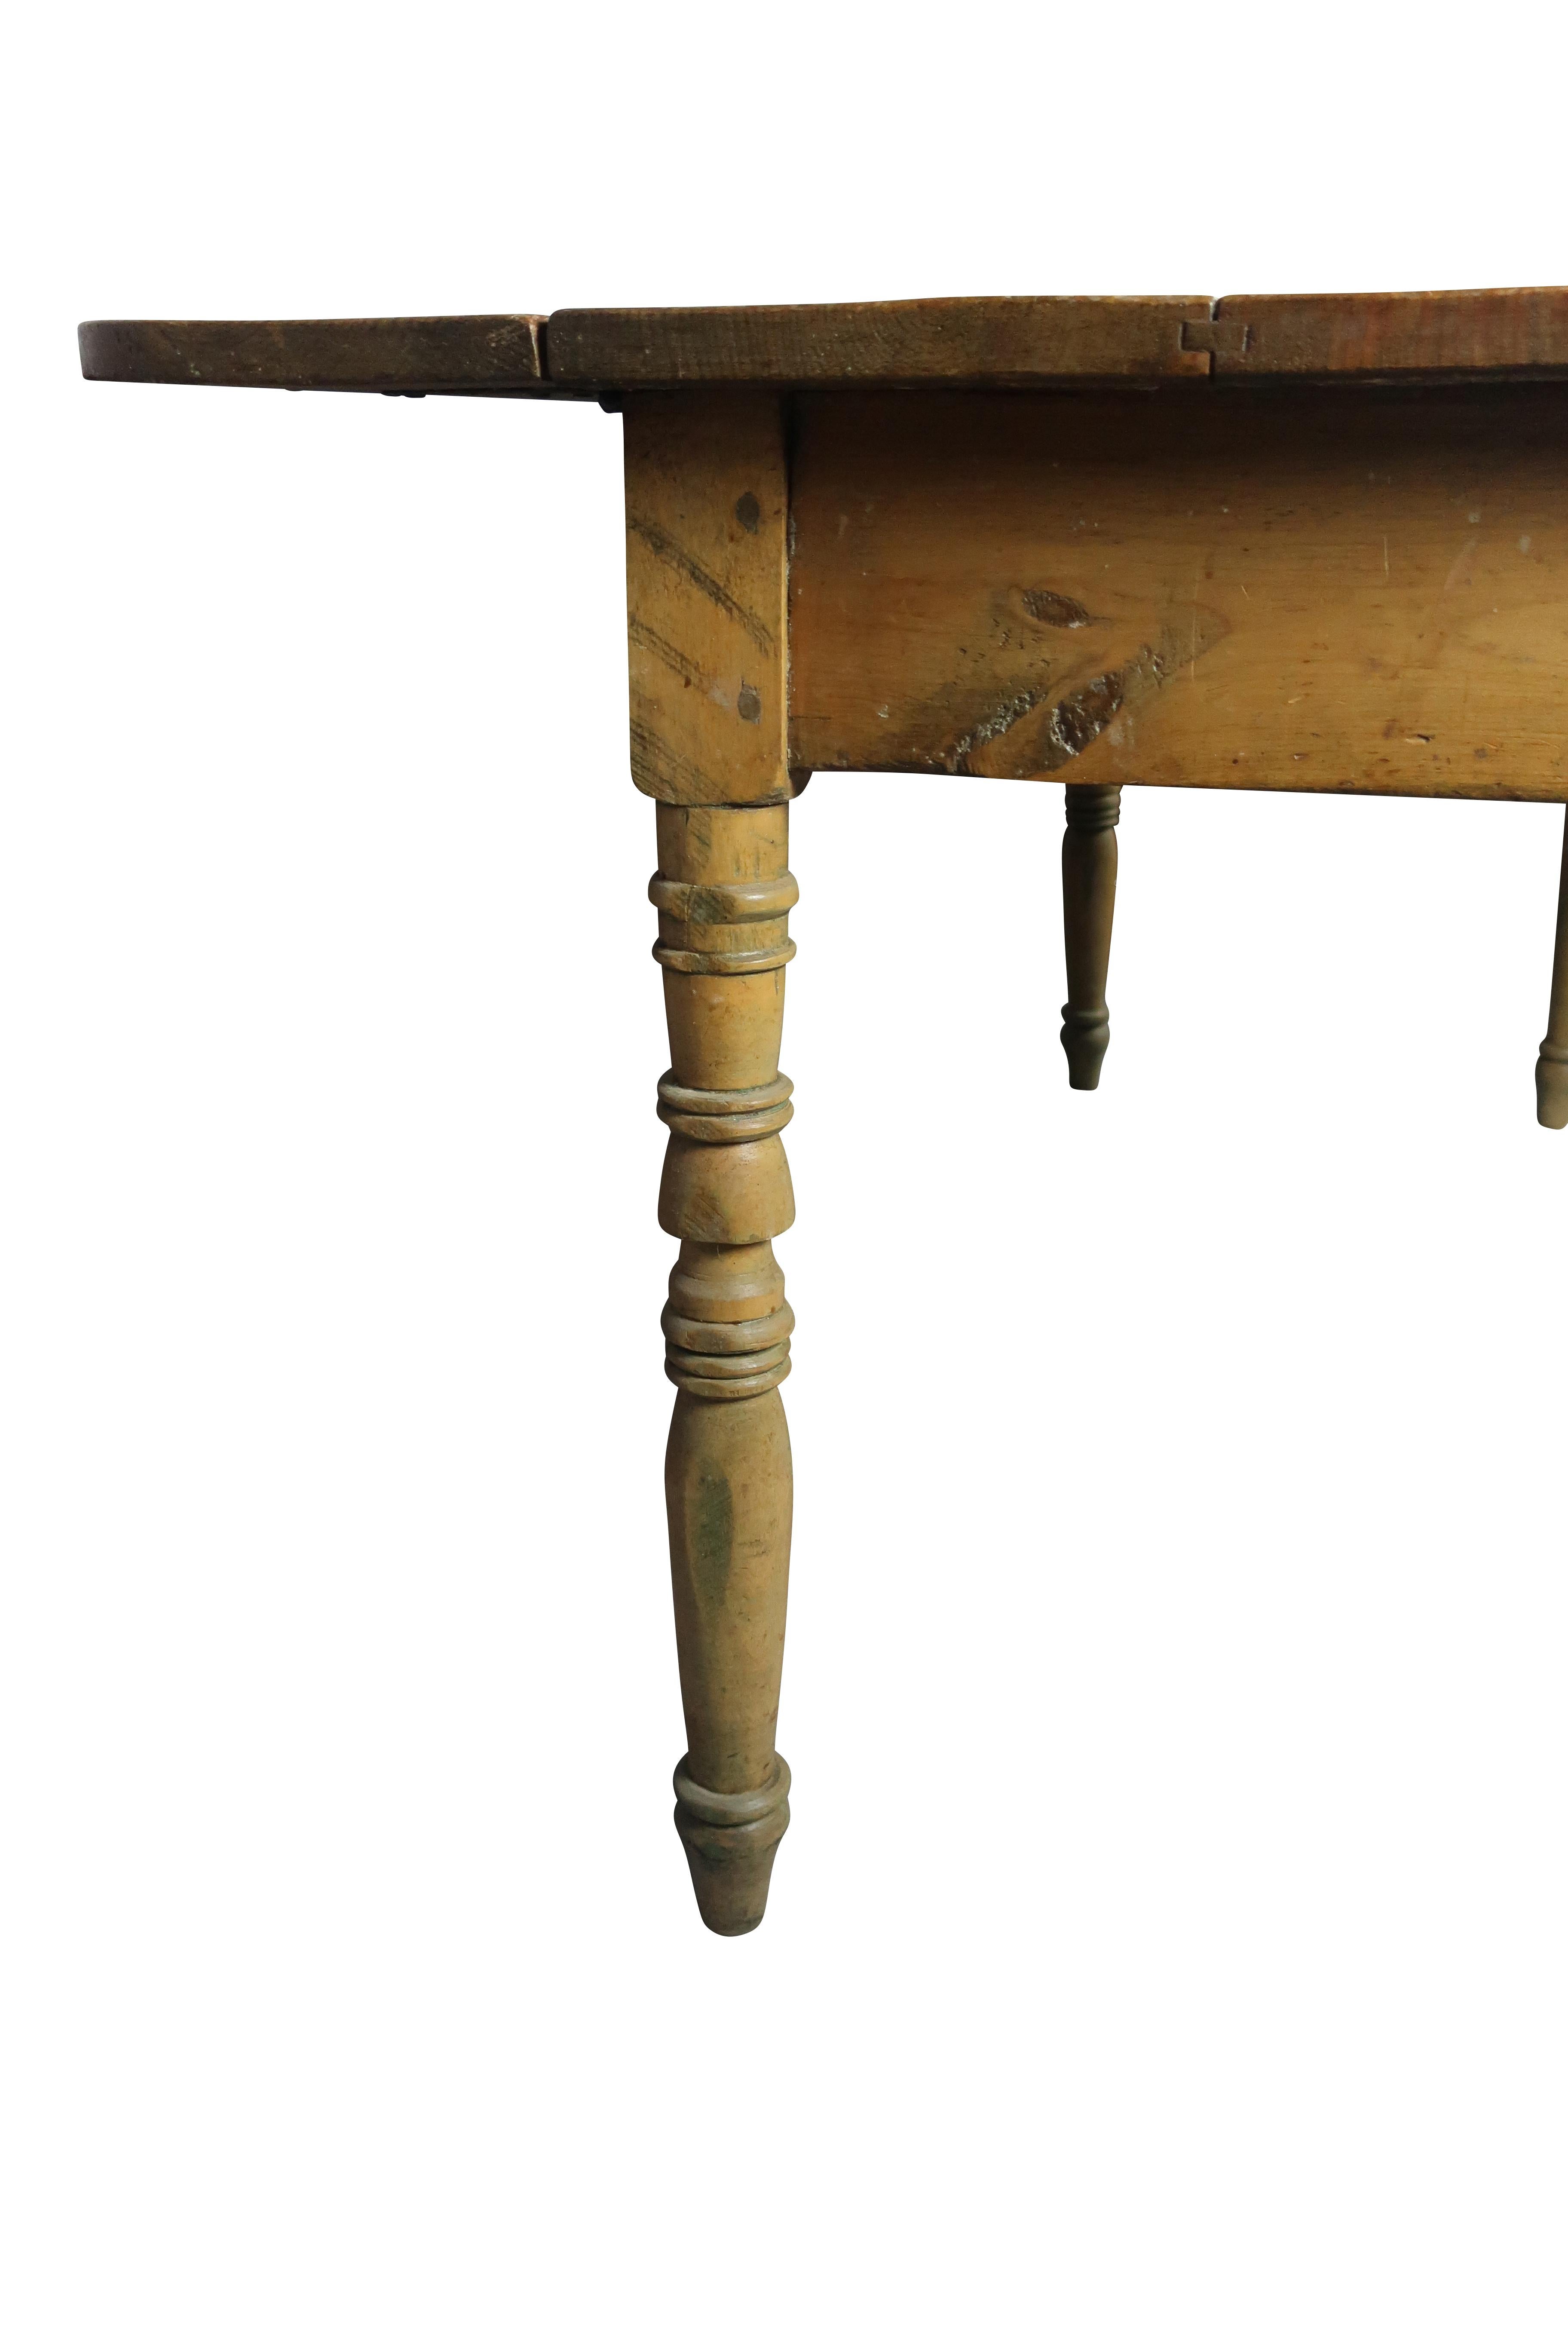 American Harvest Table Pine Drop-Leaf Dining Table